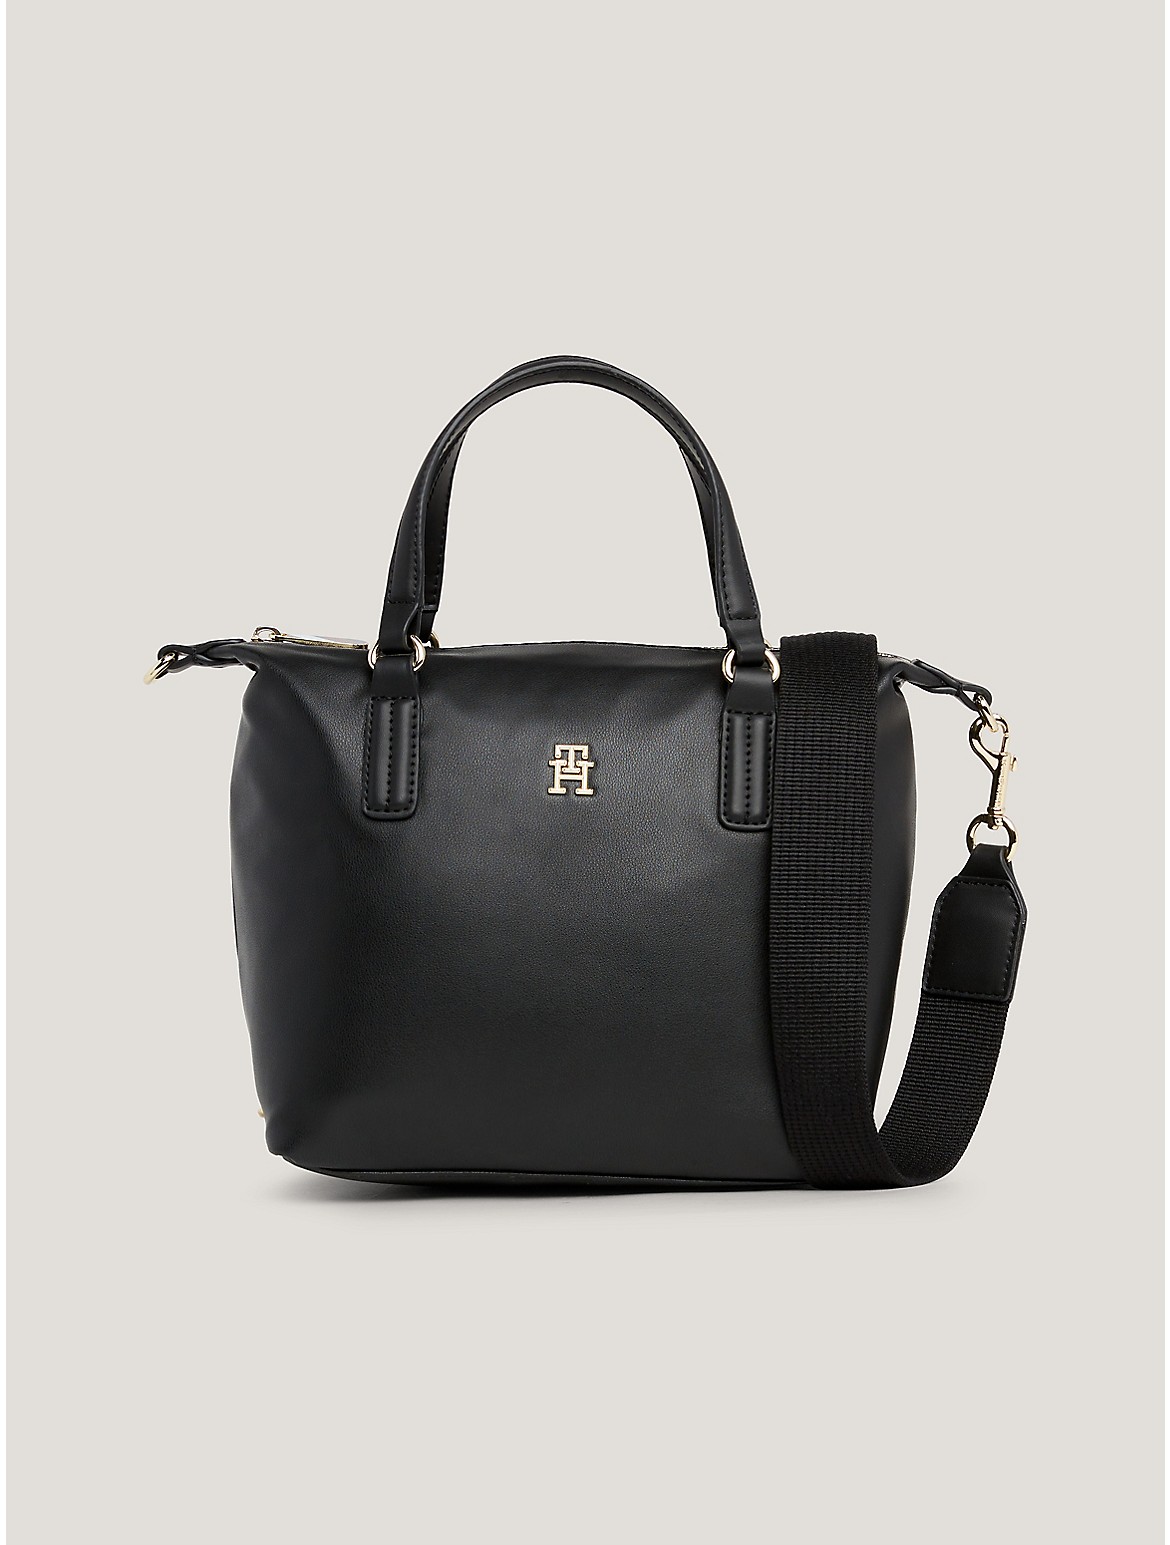 Tommy Hilfiger Women's TH Logo Small Tote - Black